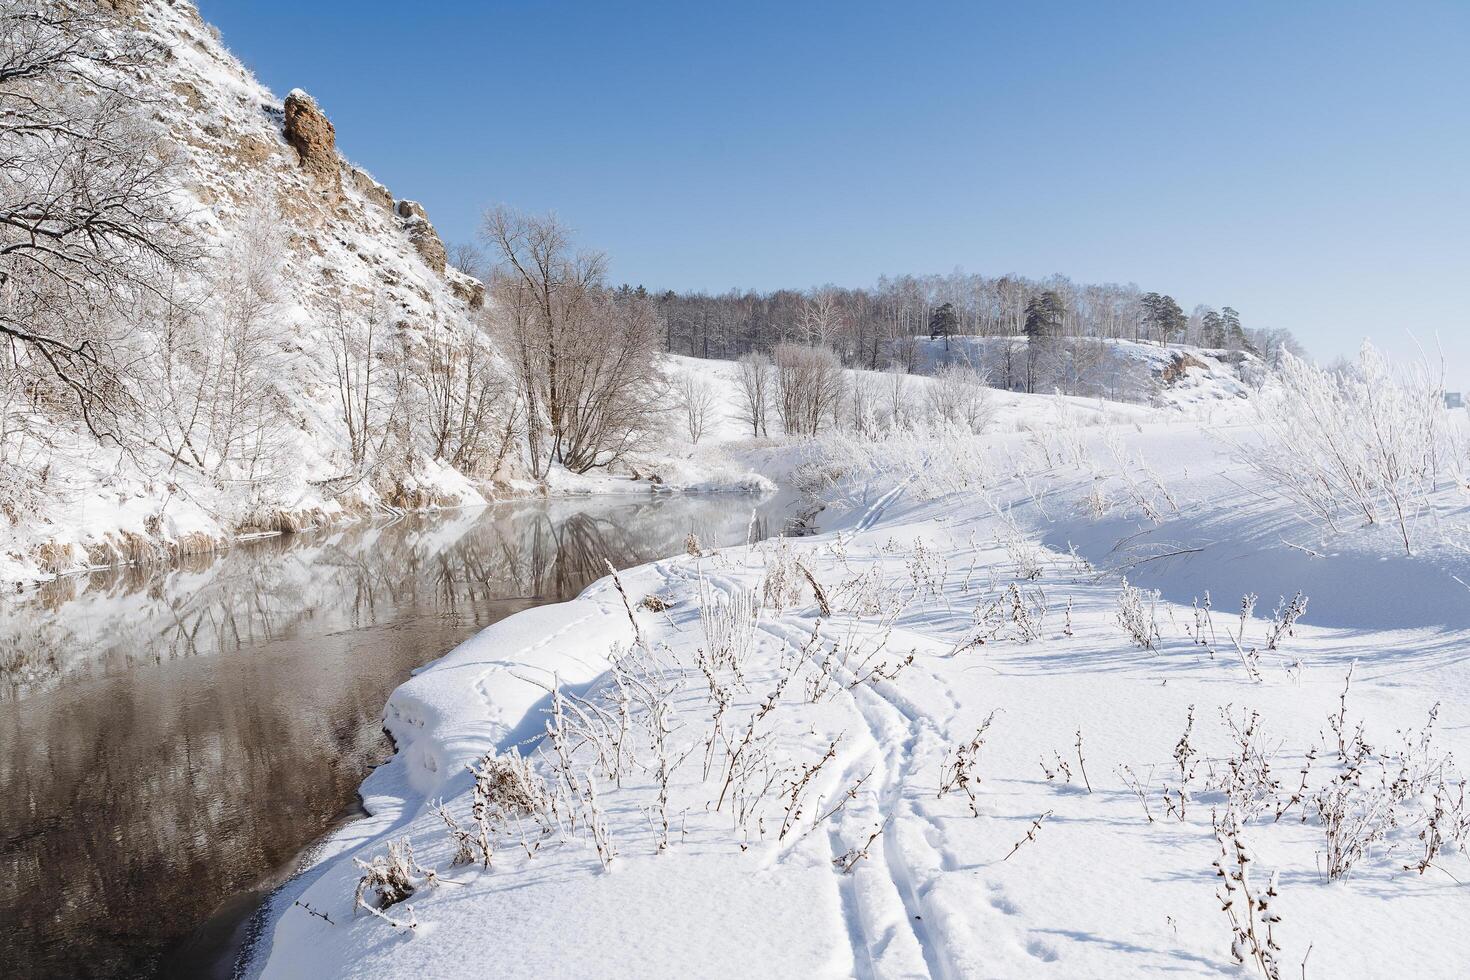 The river flows along the rock of the banks covered with snow. Winter landscape, cold season frosty weather, sunny day, blue sky. photo